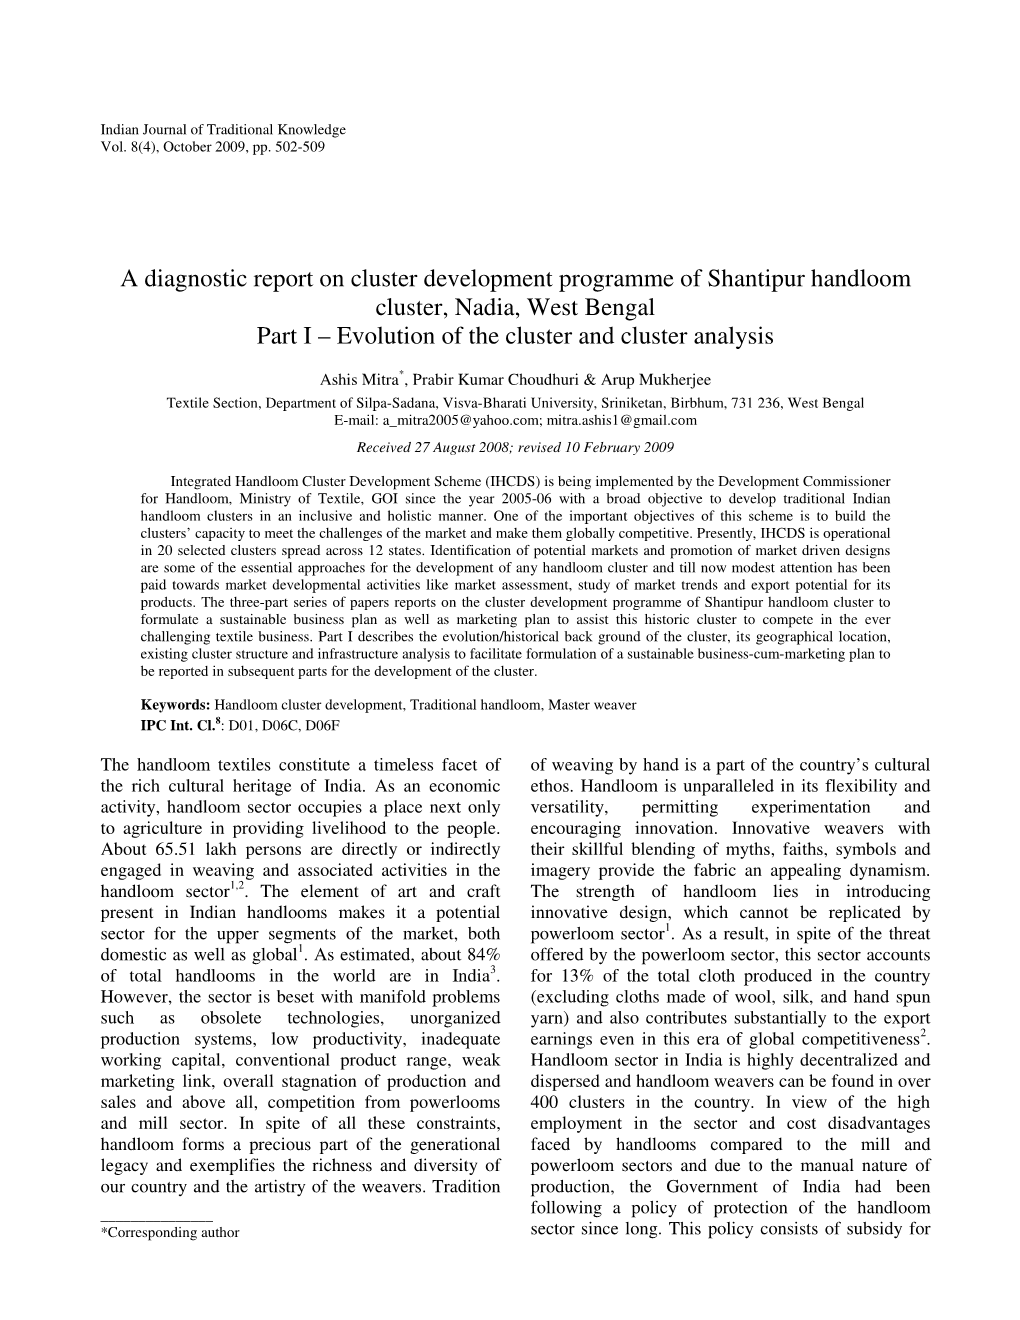 A Diagnostic Report on Cluster Development Programme of Shantipur Handloom Cluster, Nadia, West Bengal Part I – Evolution of the Cluster and Cluster Analysis